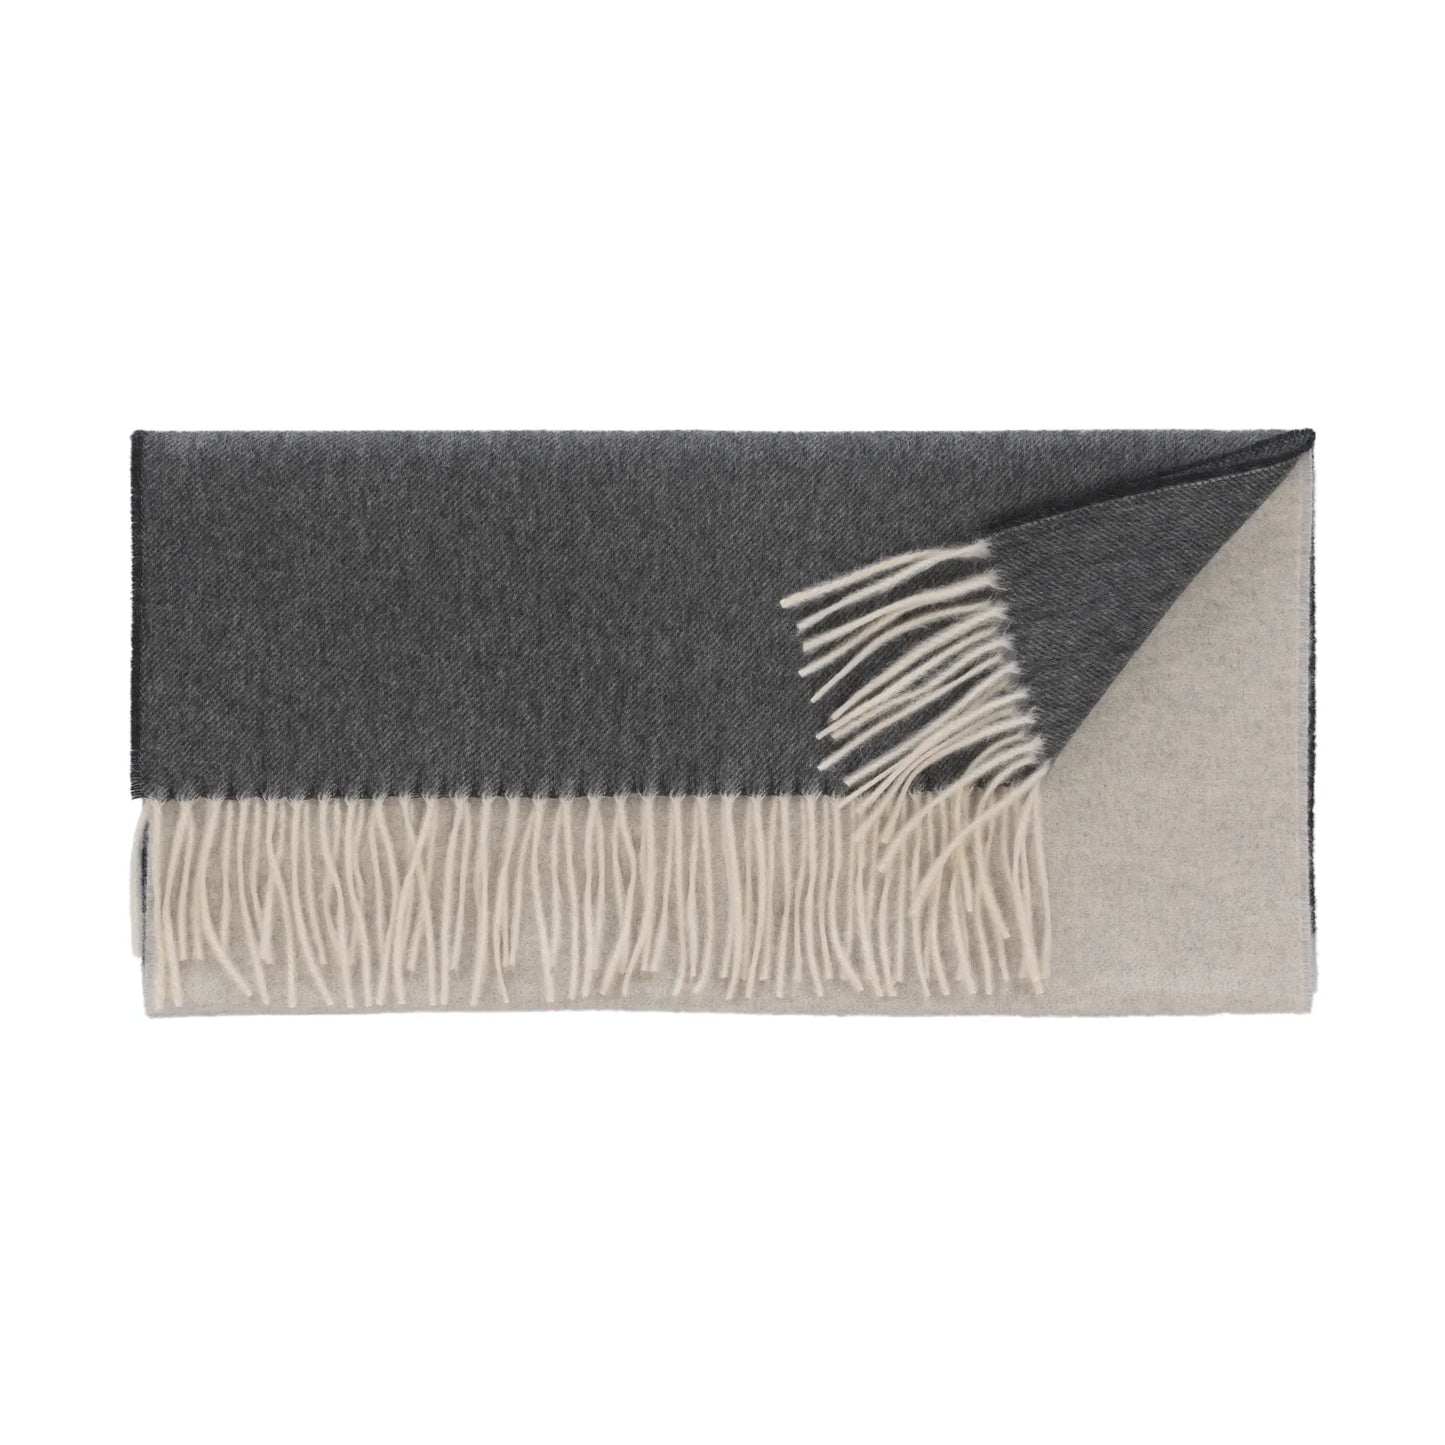 Fringed Cashmere Scarf in Dark and Light Grey